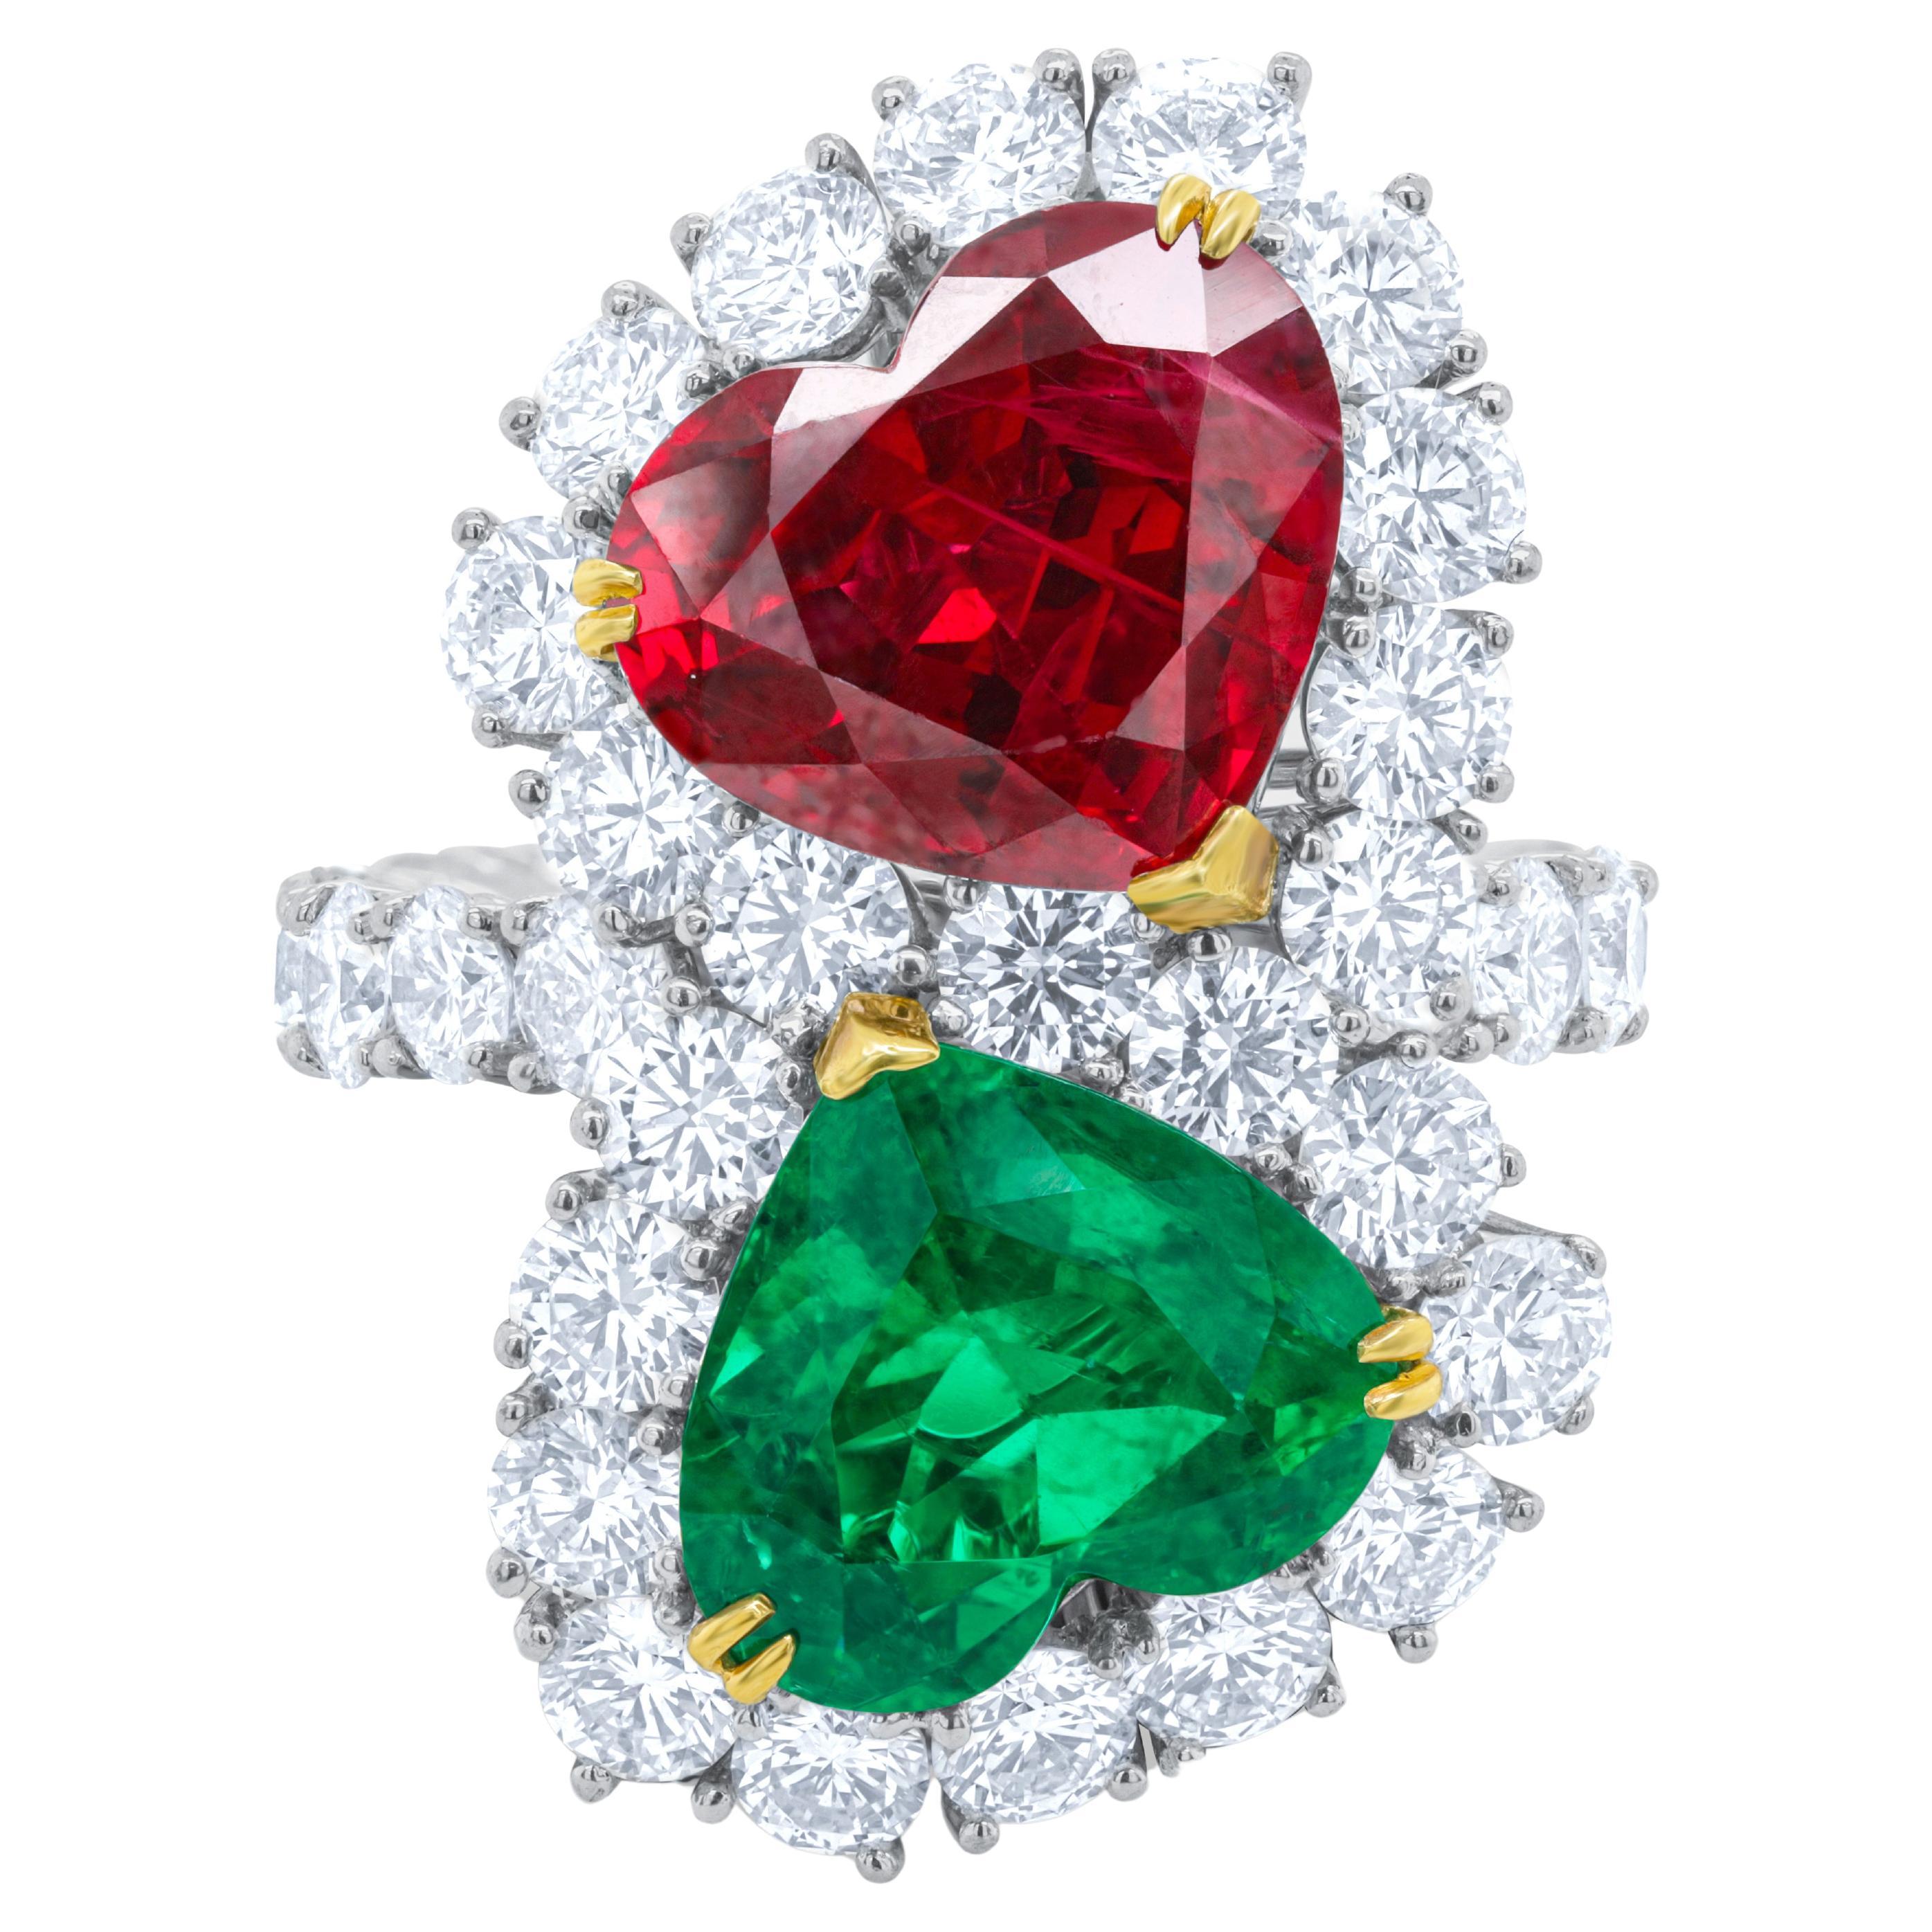 Diana M. Platinum diamond ring 11.05 cts tw of heartshaped ruby and emerald  For Sale